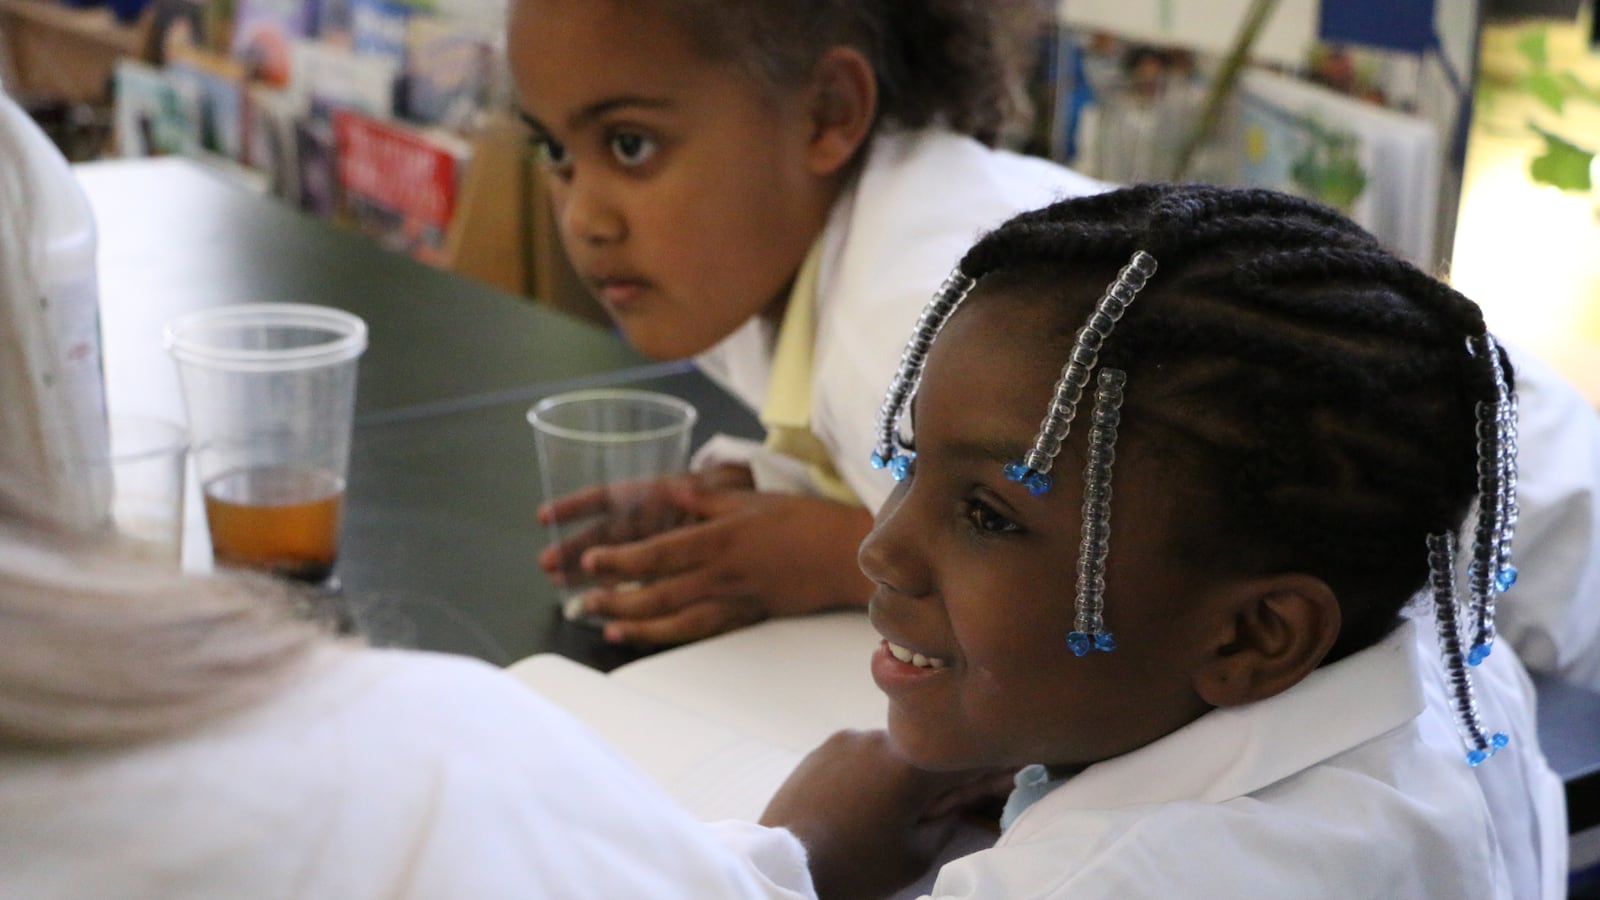 A second-grade student at P.S. 307 in Brooklyn does a STEM-focused experiment manipulating water in class.